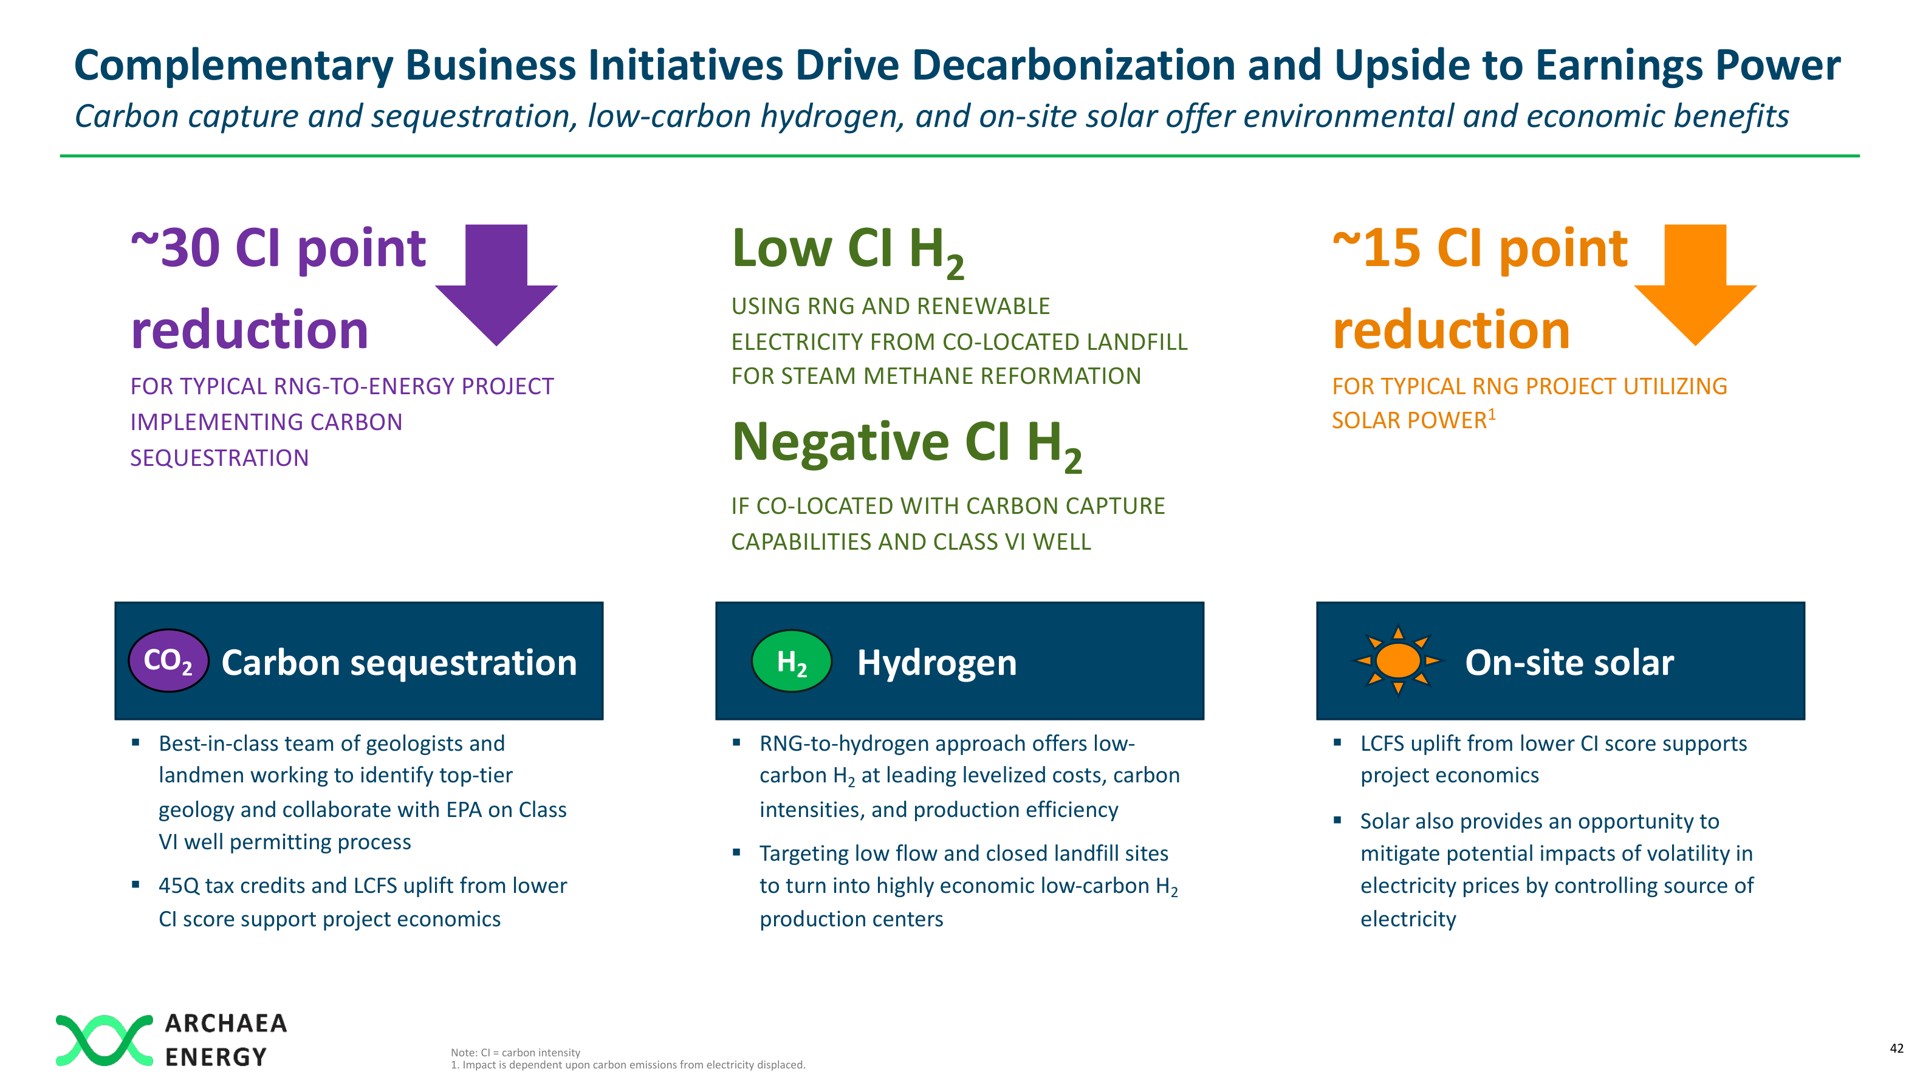 complementary business initiatives drive decarbonization and upside to earnings power point reduction low negative point reduction | Archaea Energy